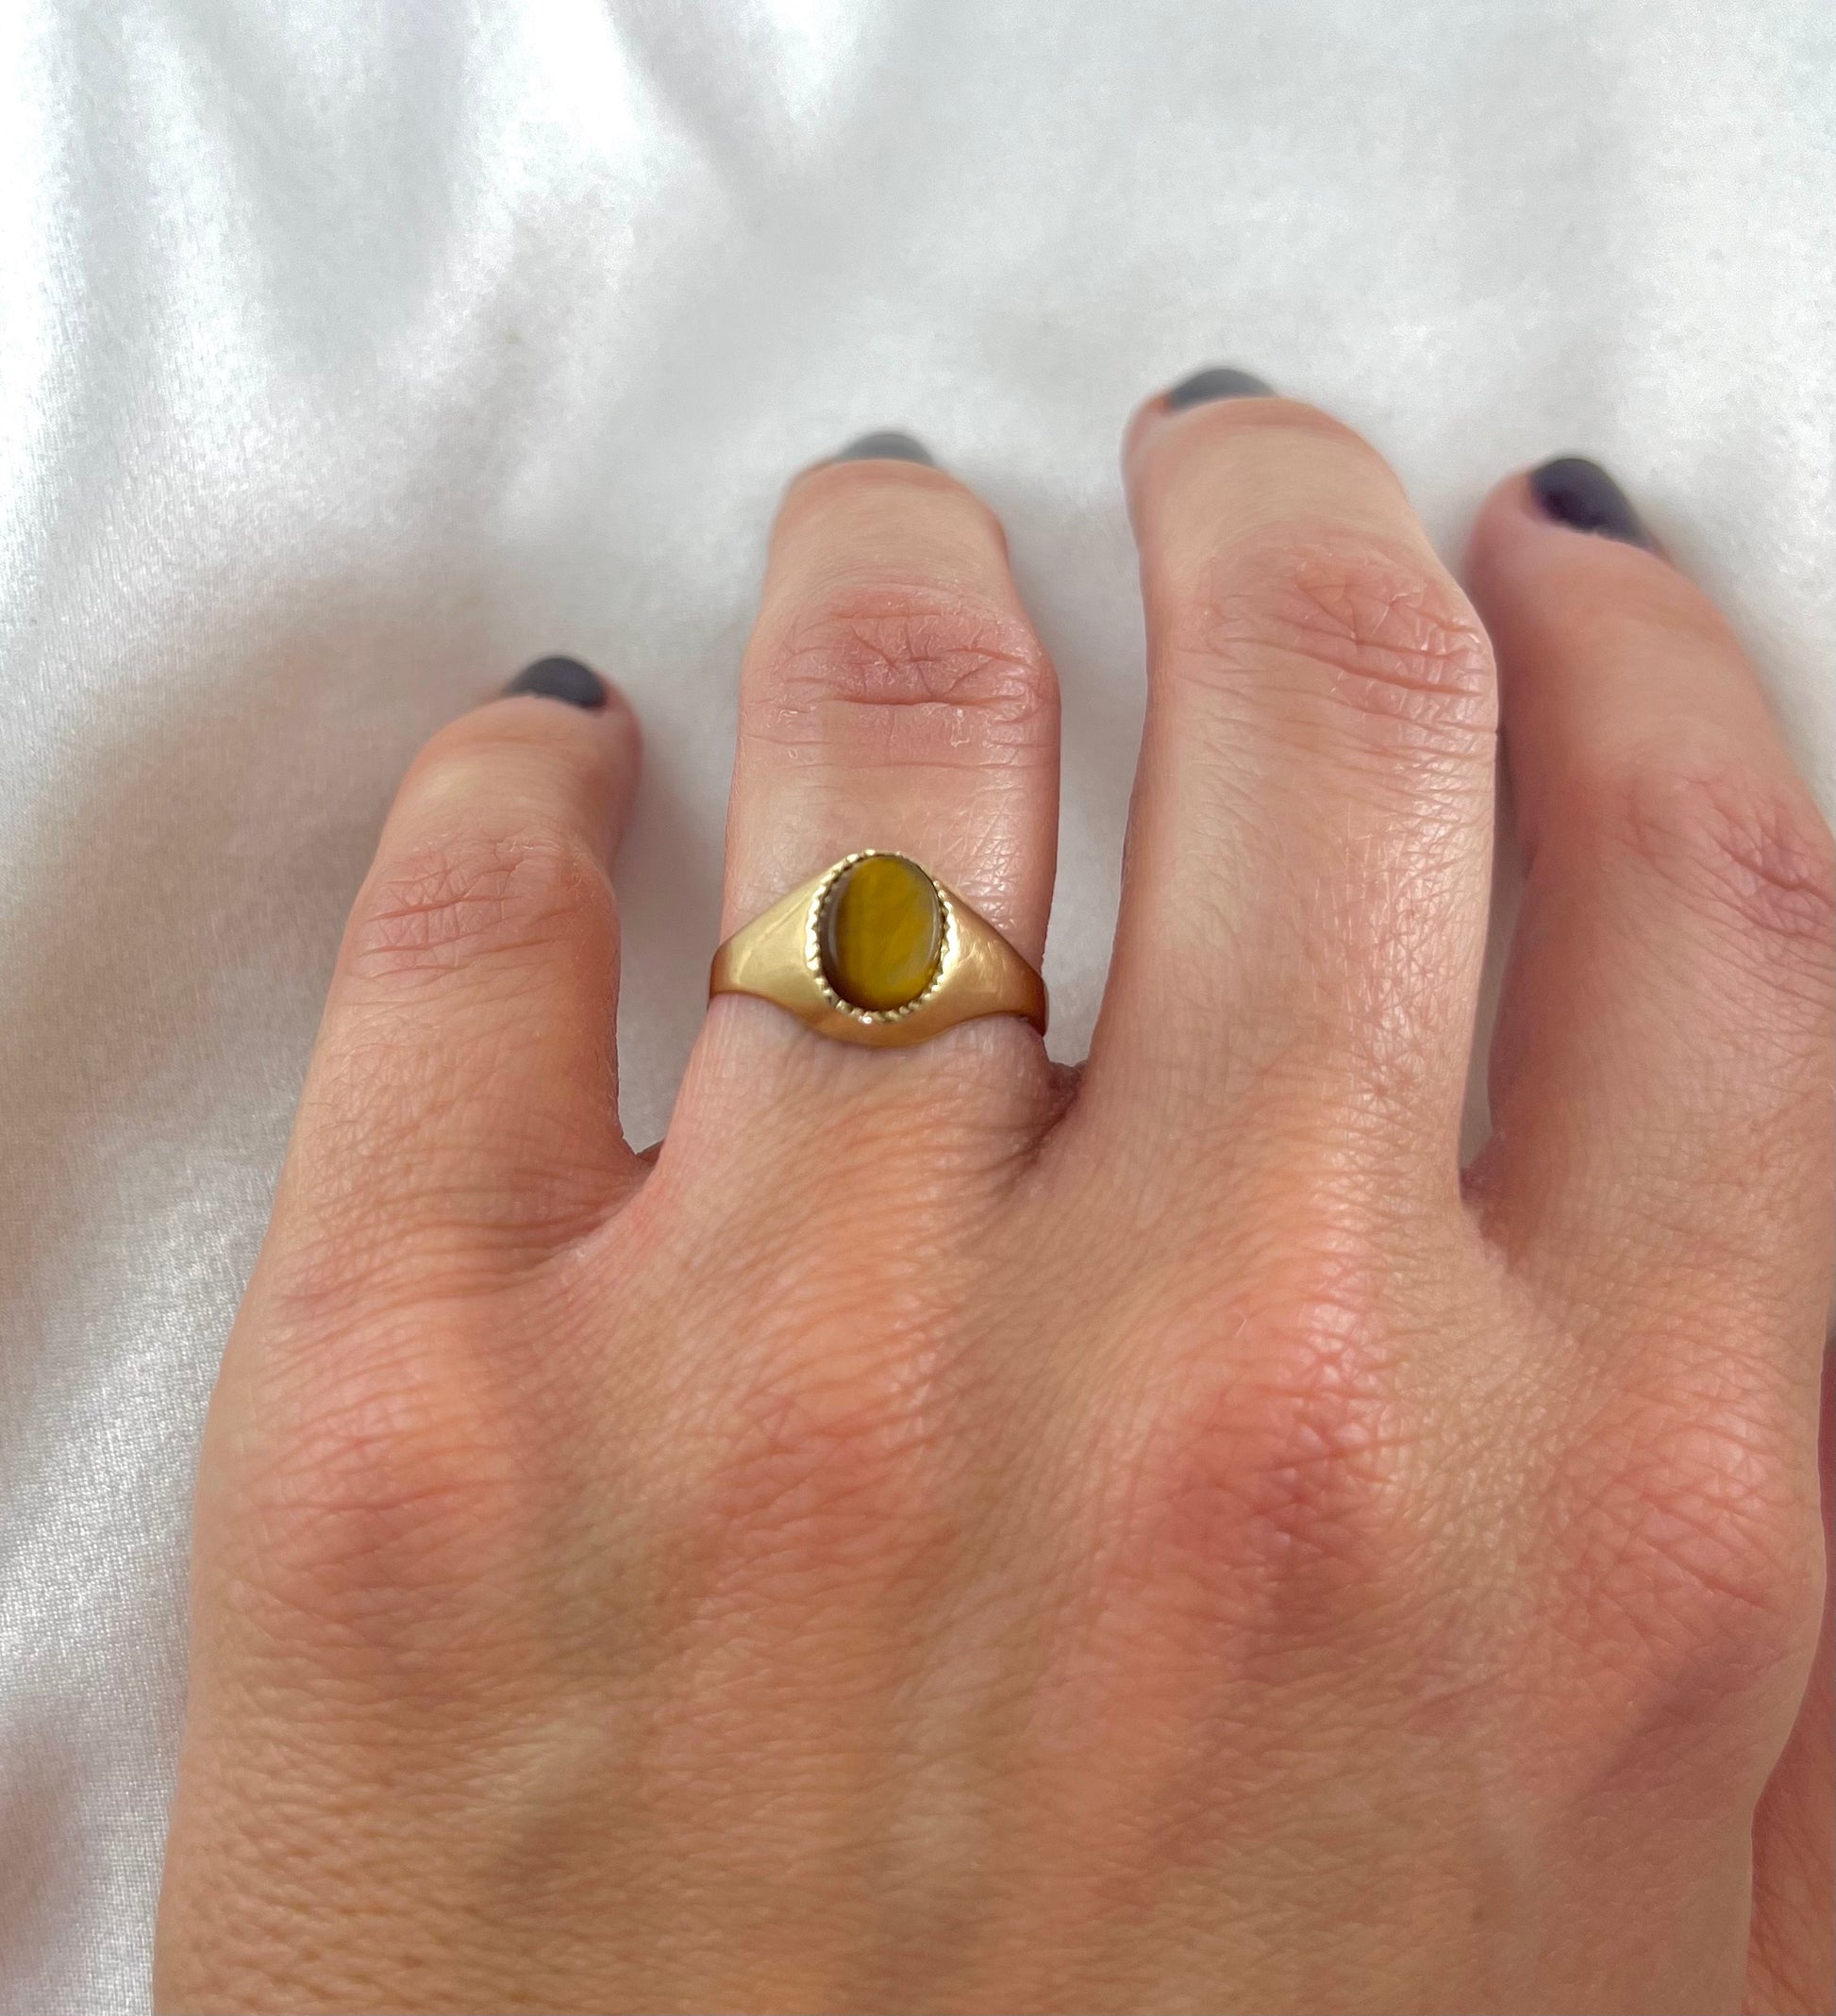 Vintage 9ct Yellow Gold Tigers Eye Ring, Size L UK 1970s